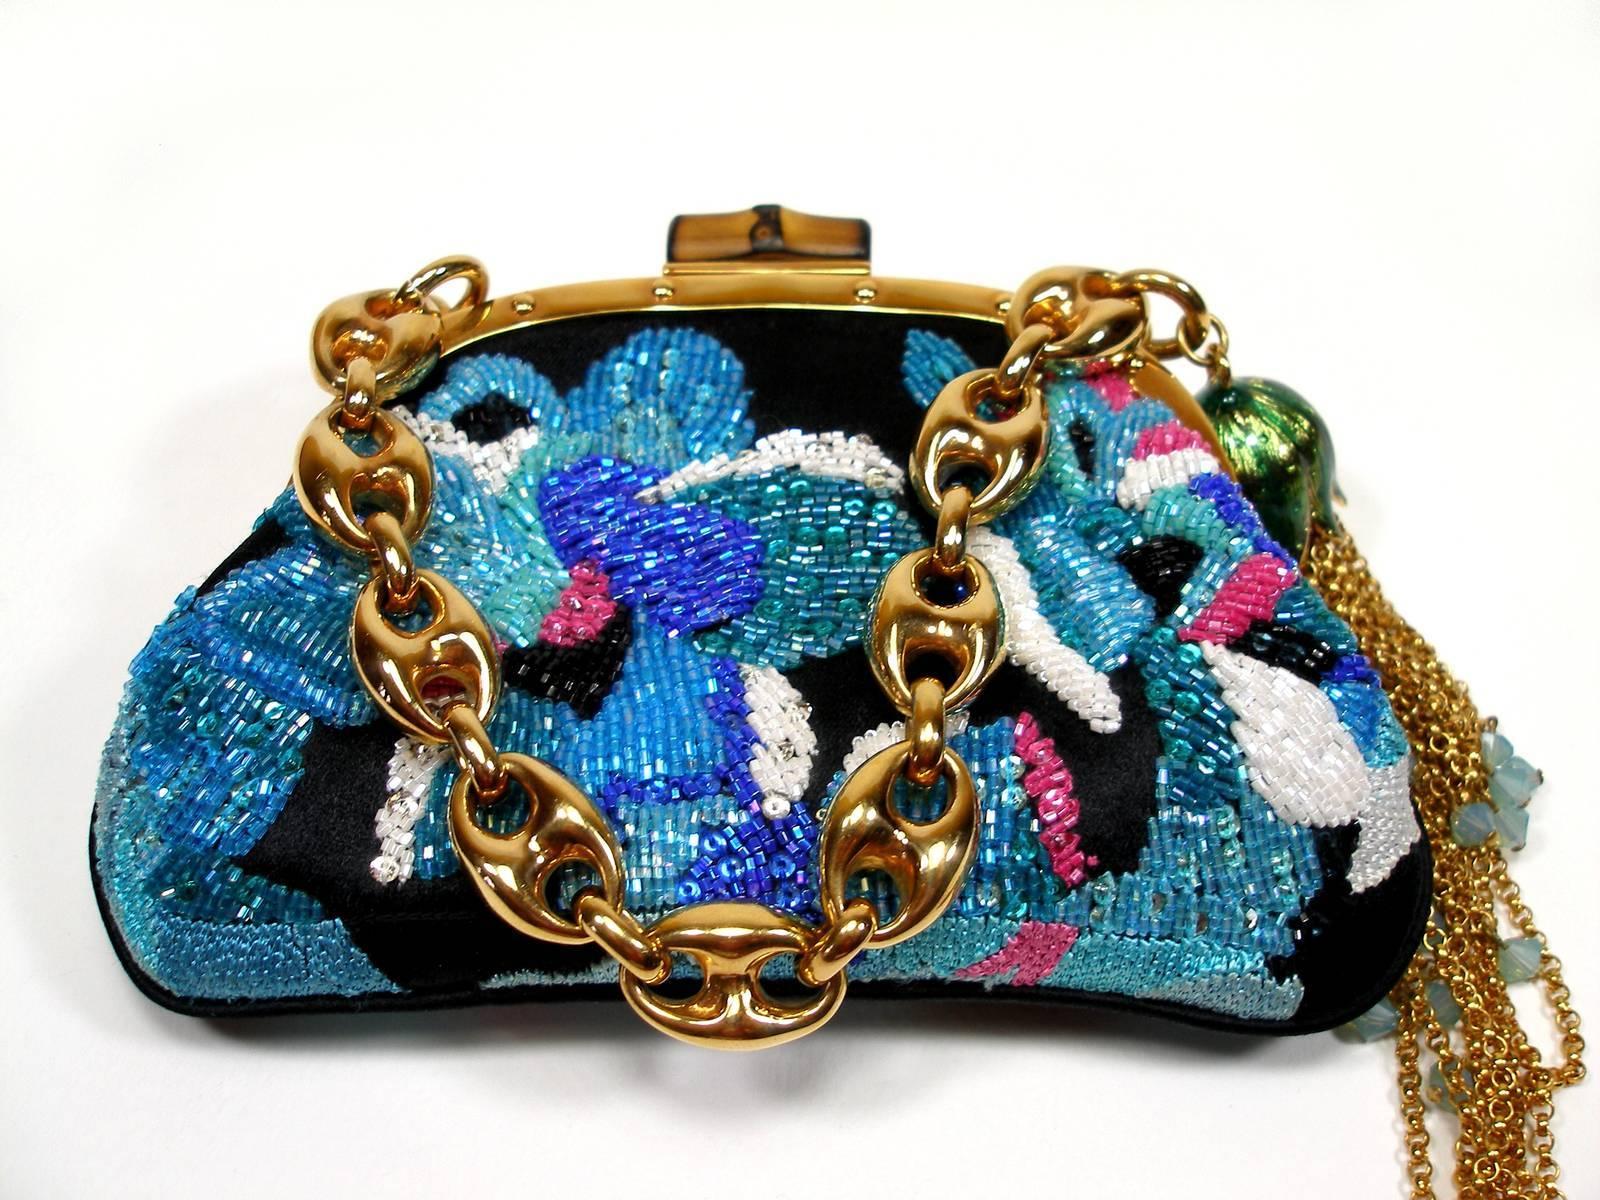 Amazing Gucci Mini evening minaudière in silk embroidered with glass beads and enriched with beautifully made floral charms.
The Bamboo lock and the Marina chain are historical iconic elements of the Italian maison.
The inside is in golden